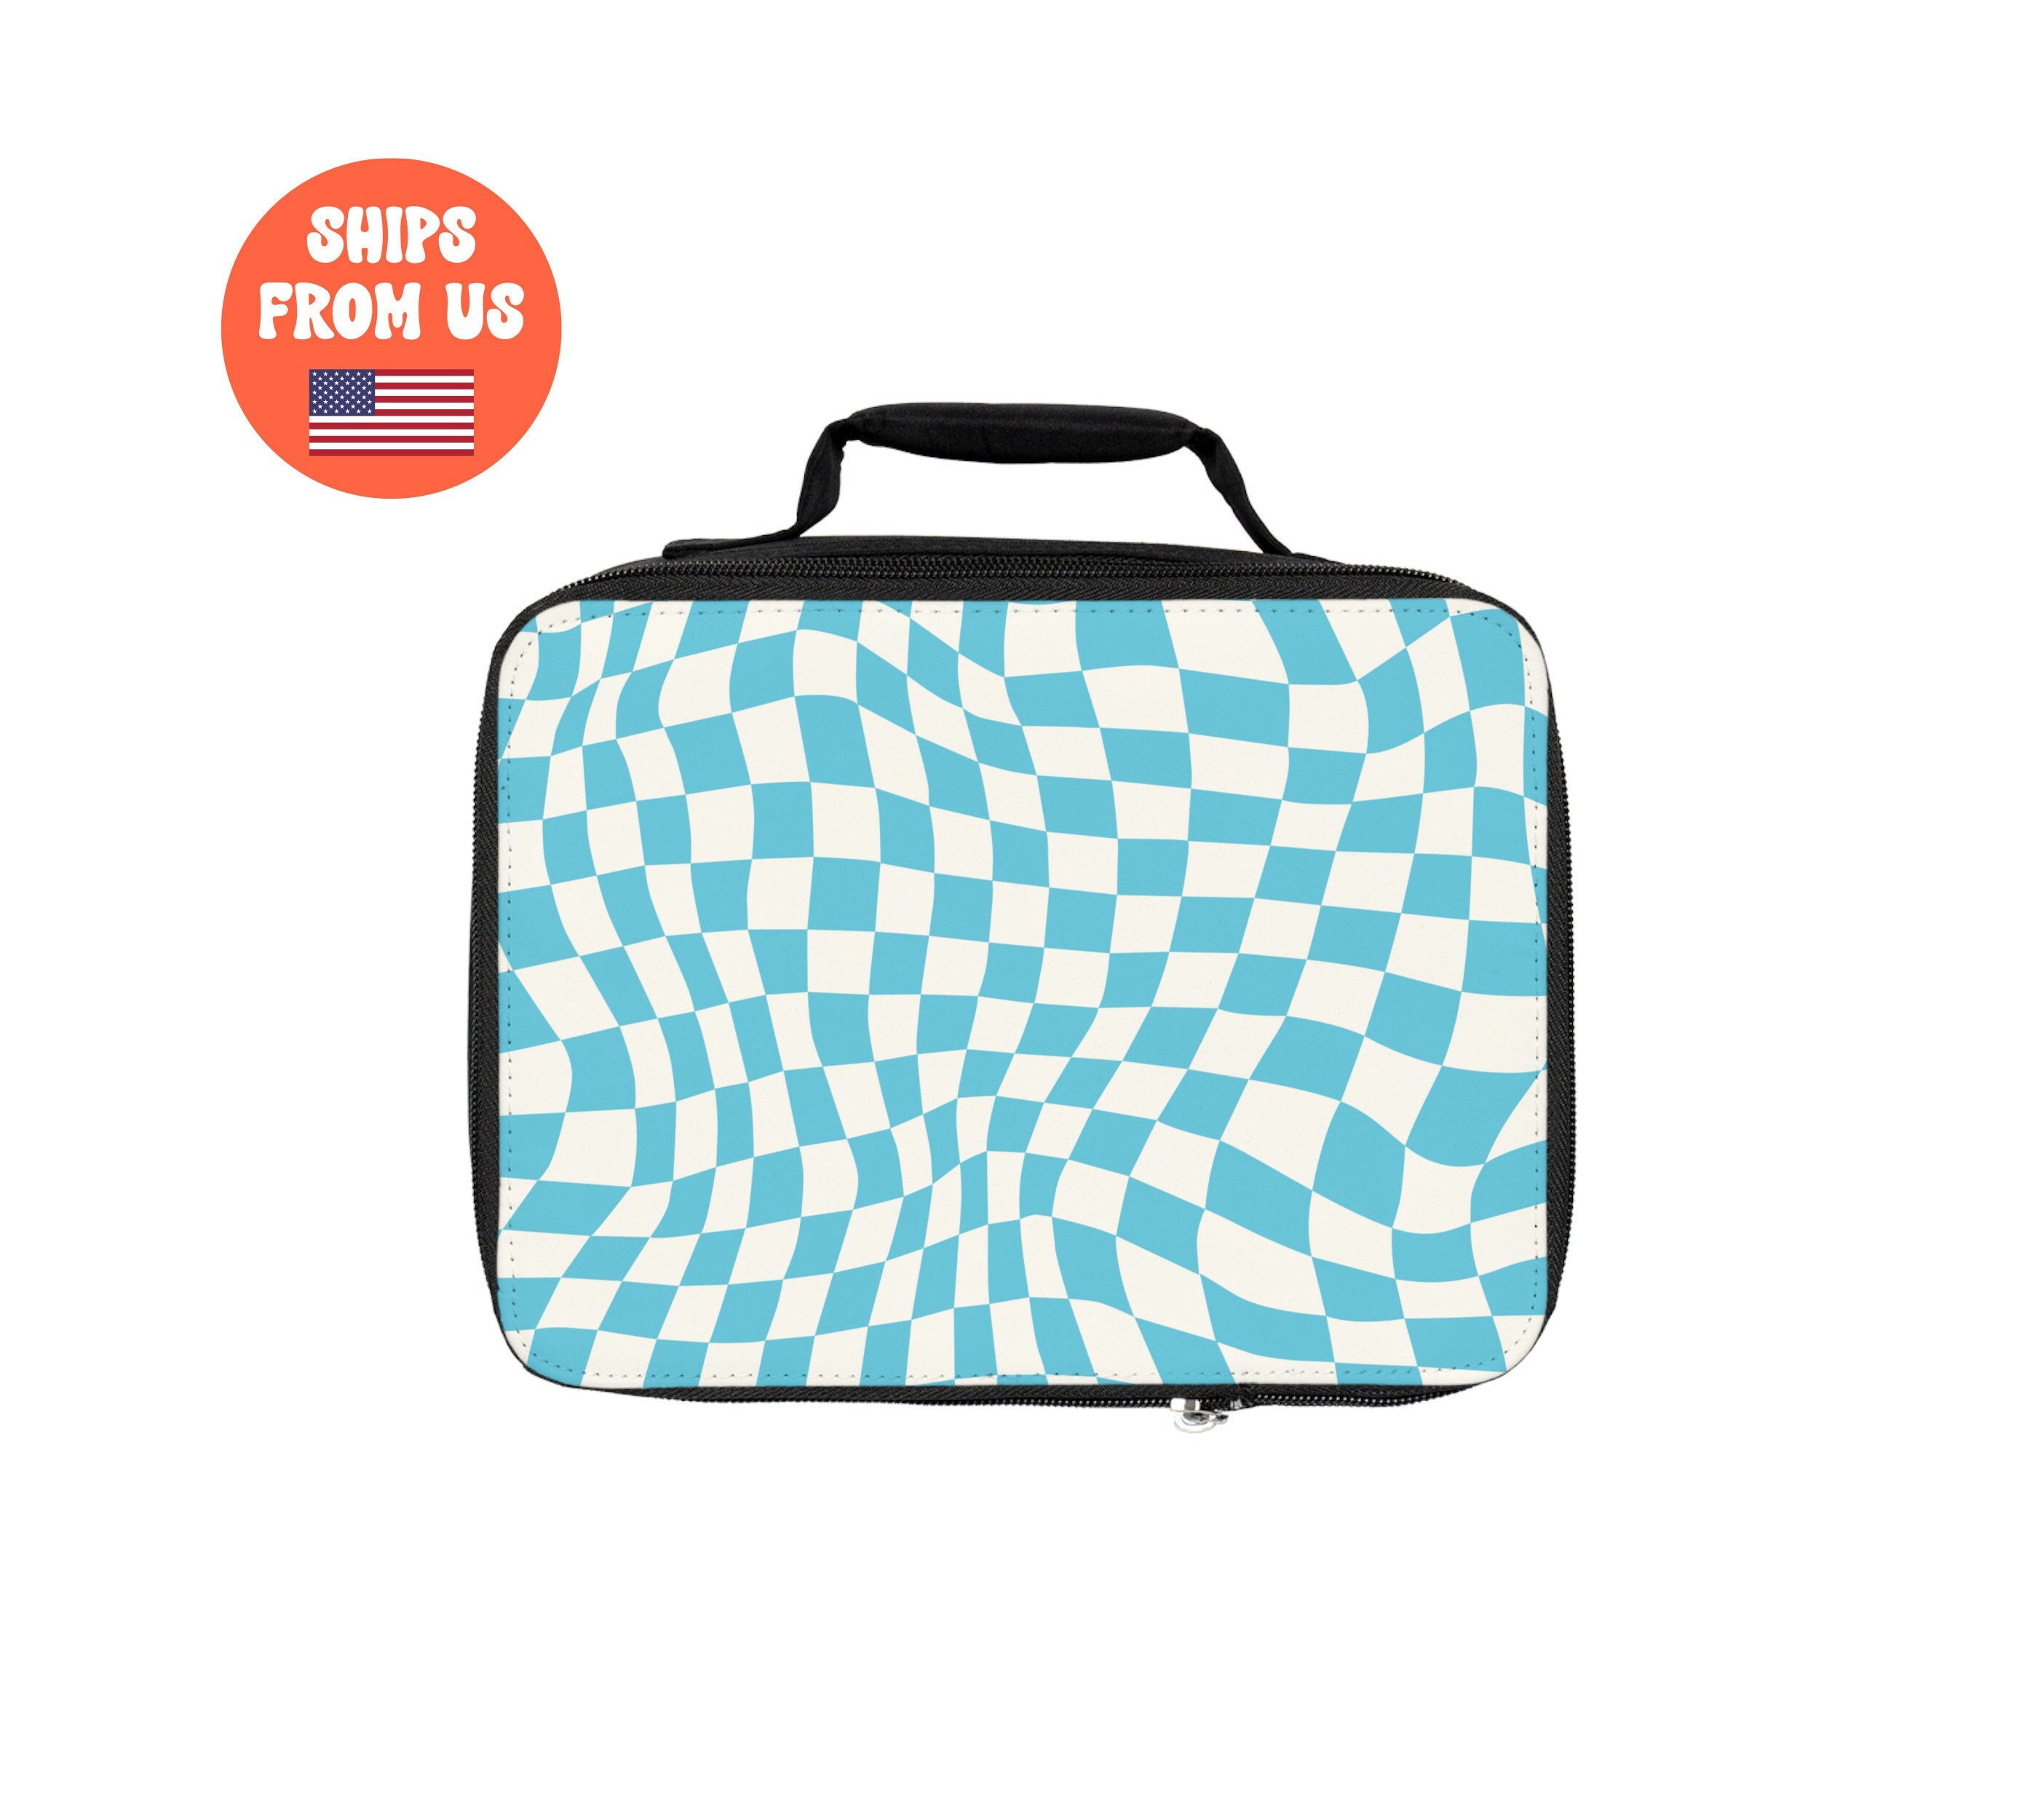  PasTard Checkered Lunch Bag Reusable Insulated Lunch Box Keep  Food Cooler Thermal Lunch Tote for Women Men: Home & Kitchen